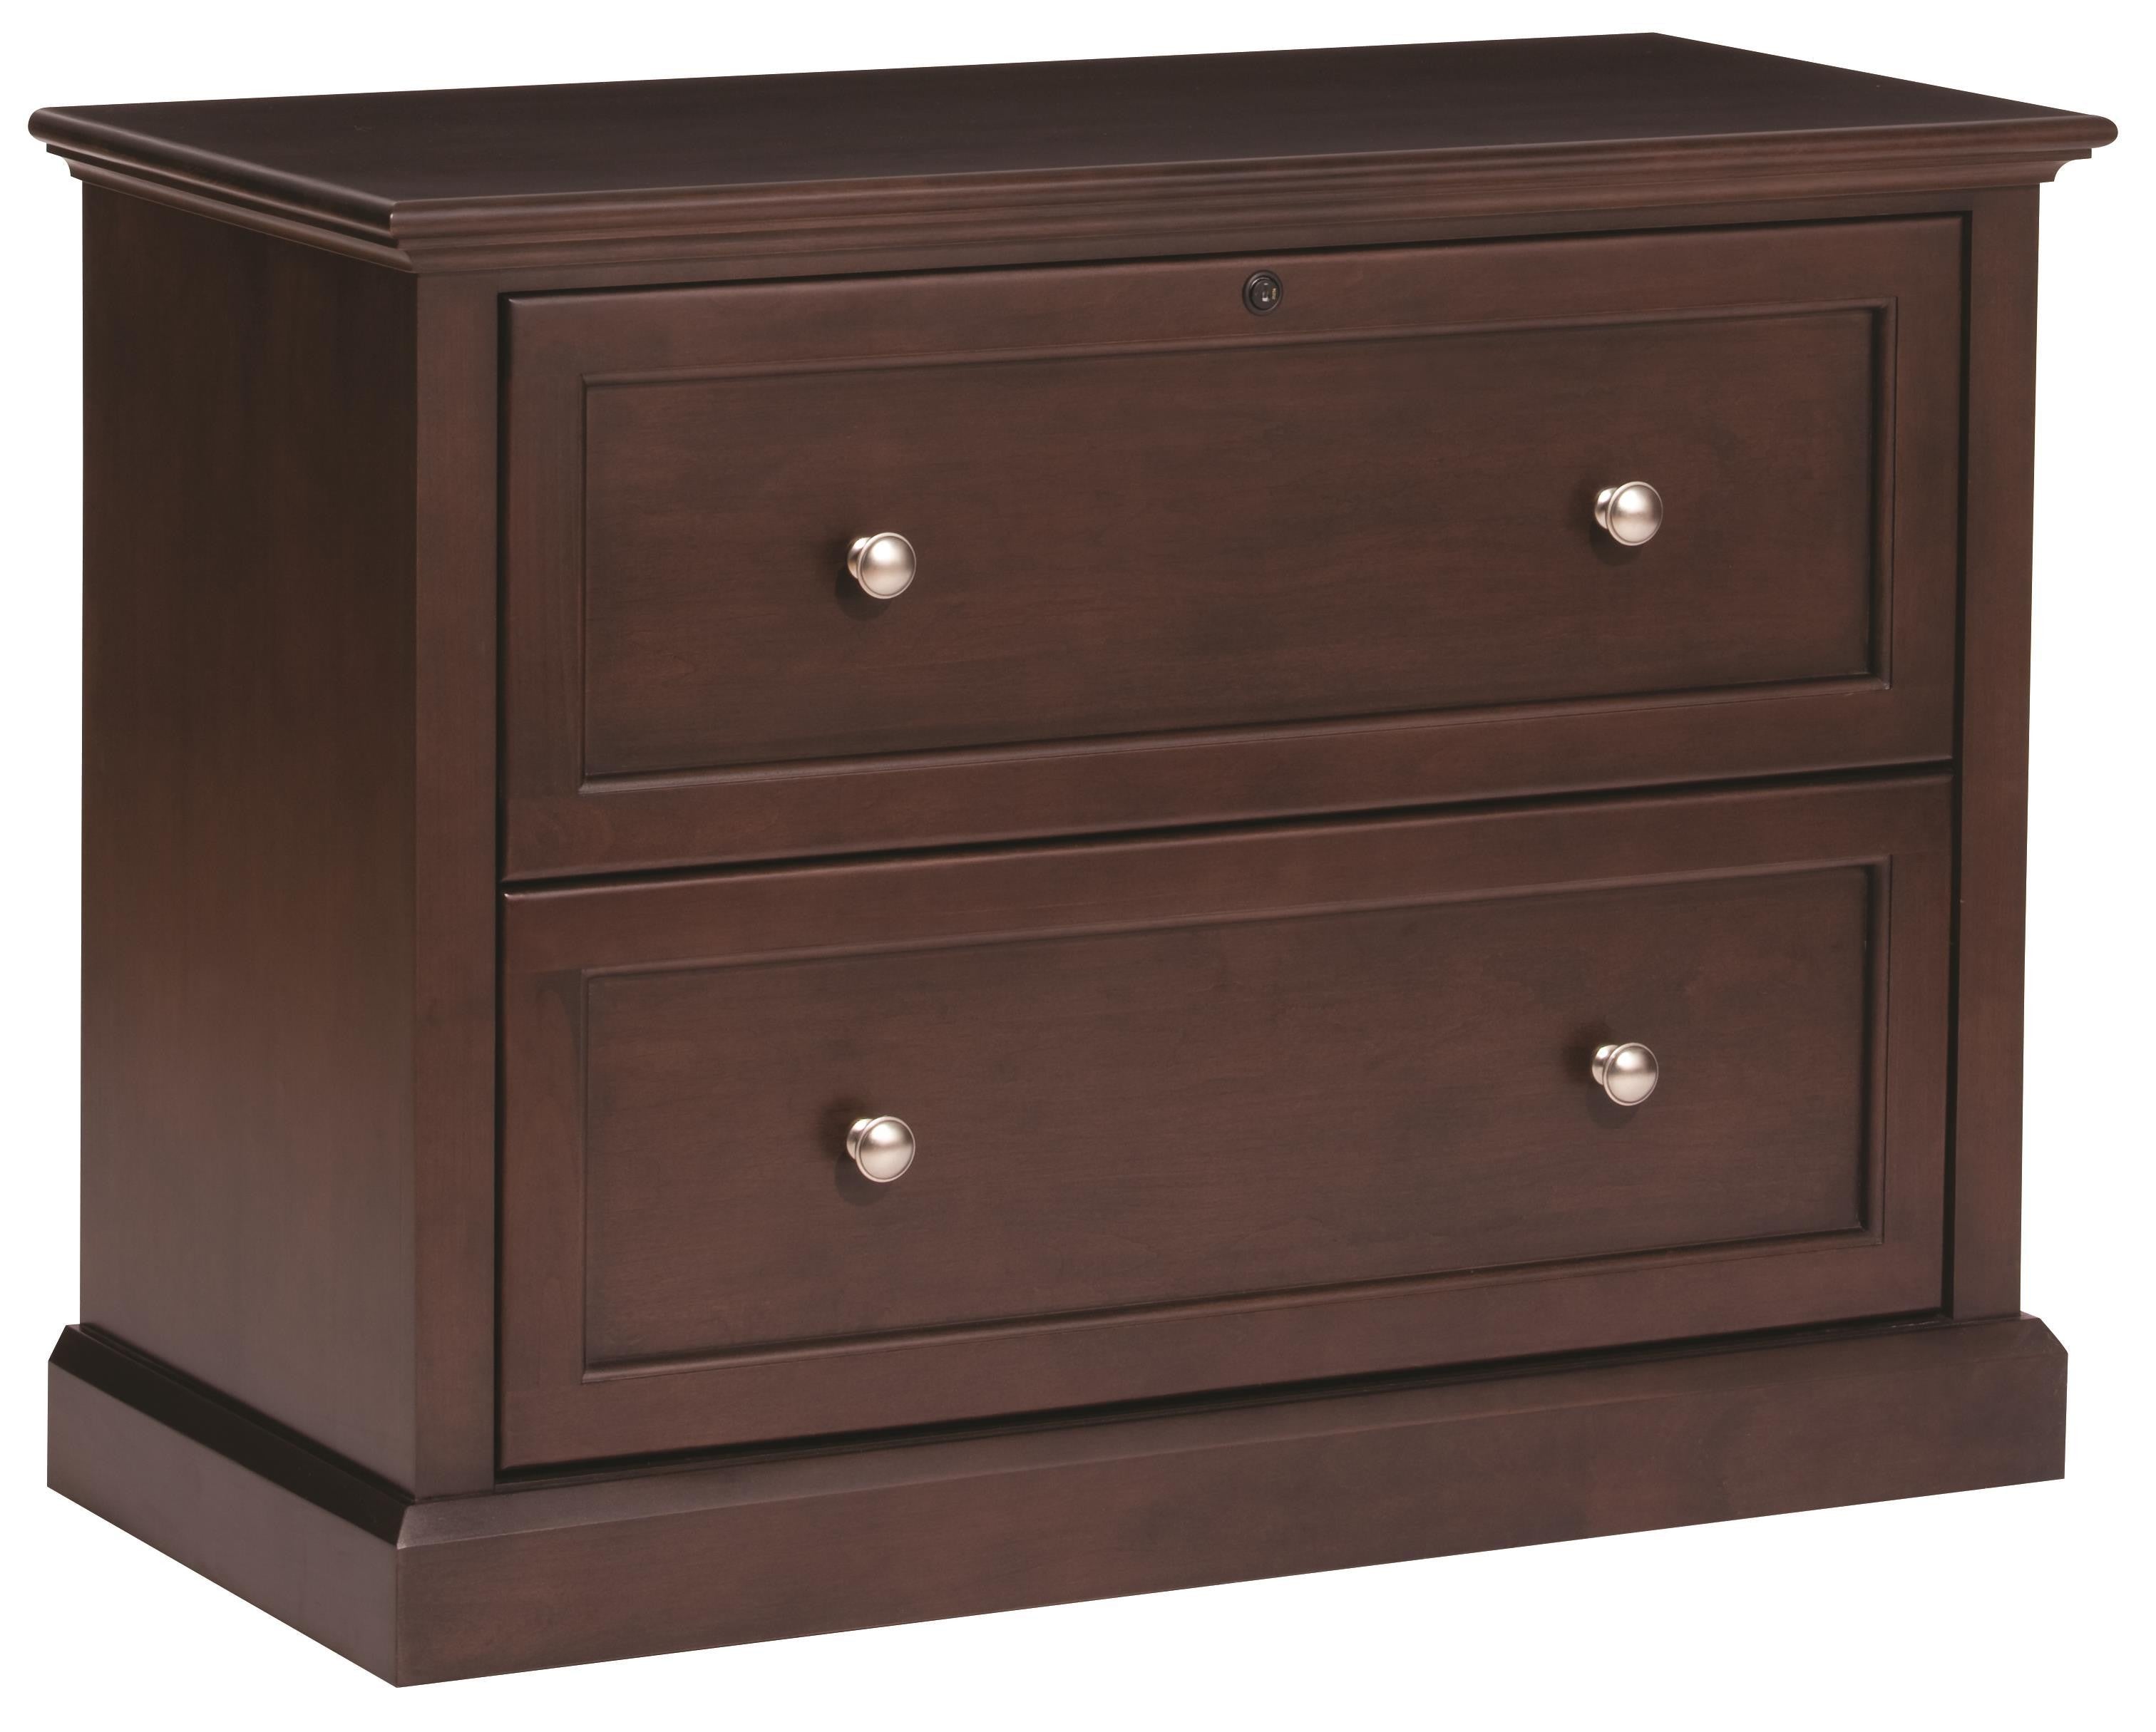 2403 McKenzie Lateral File Cabinets